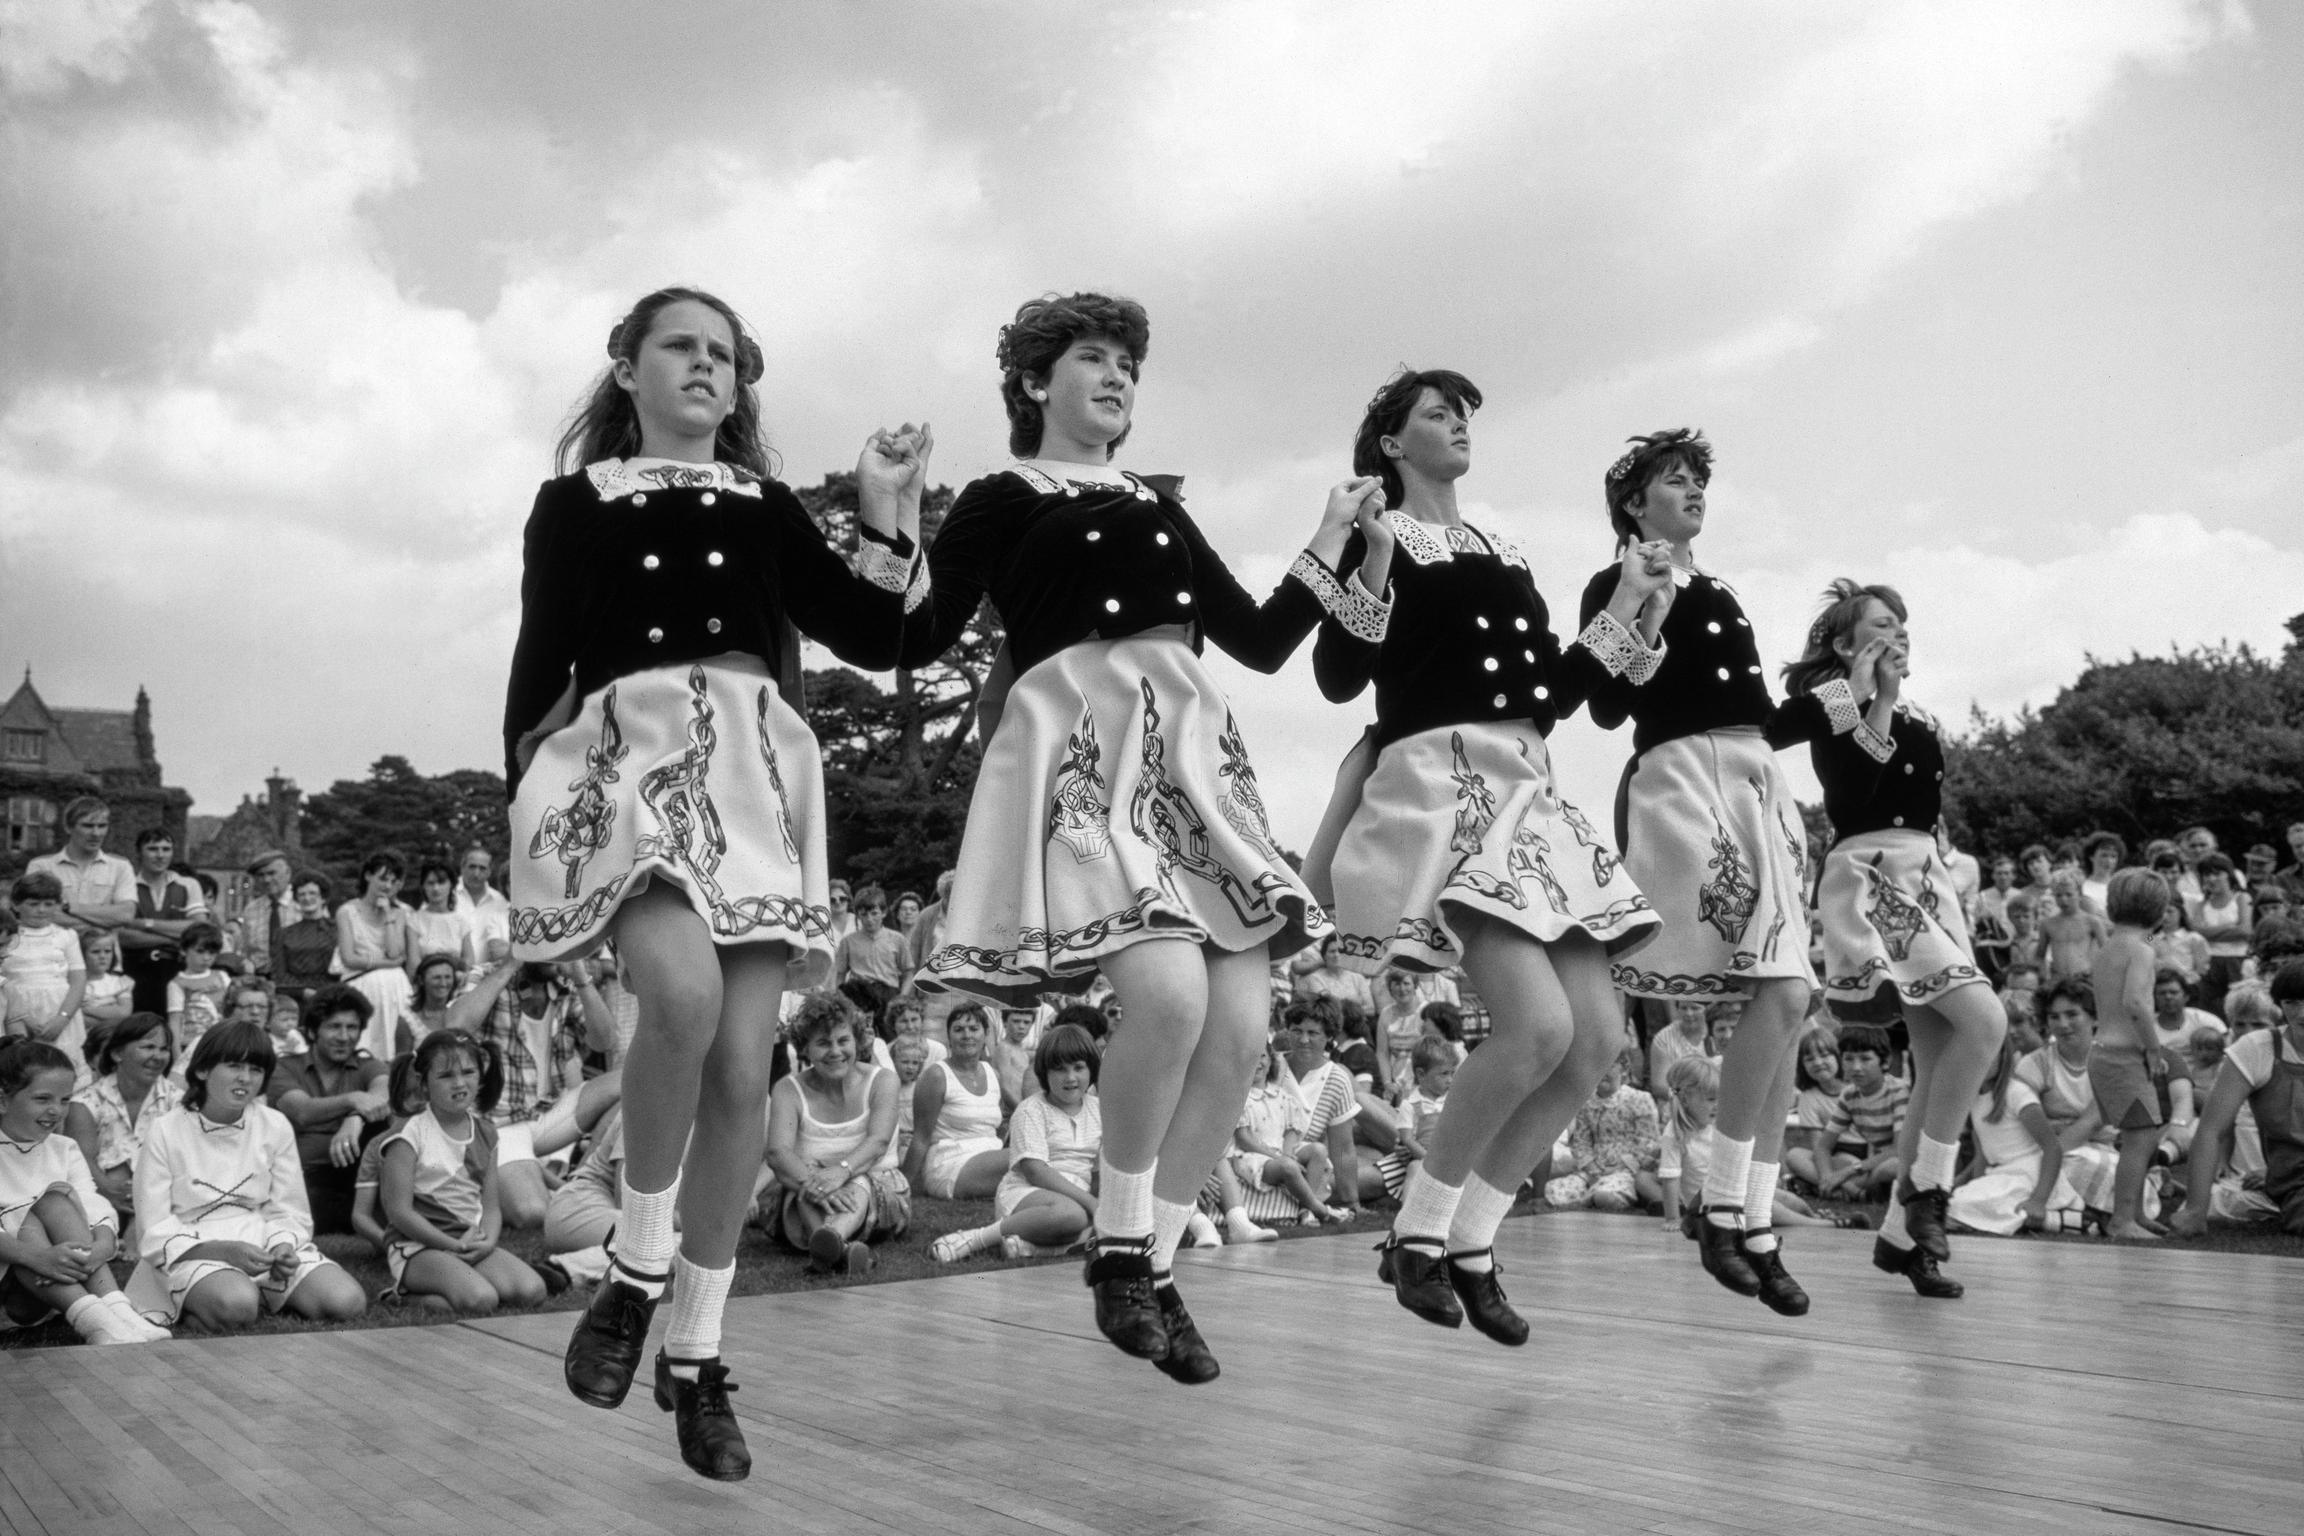 The tradition of Irish dancing is kept alive by numerous schools who frequently give demonstrations. Killarney. County Kerry. Ireland